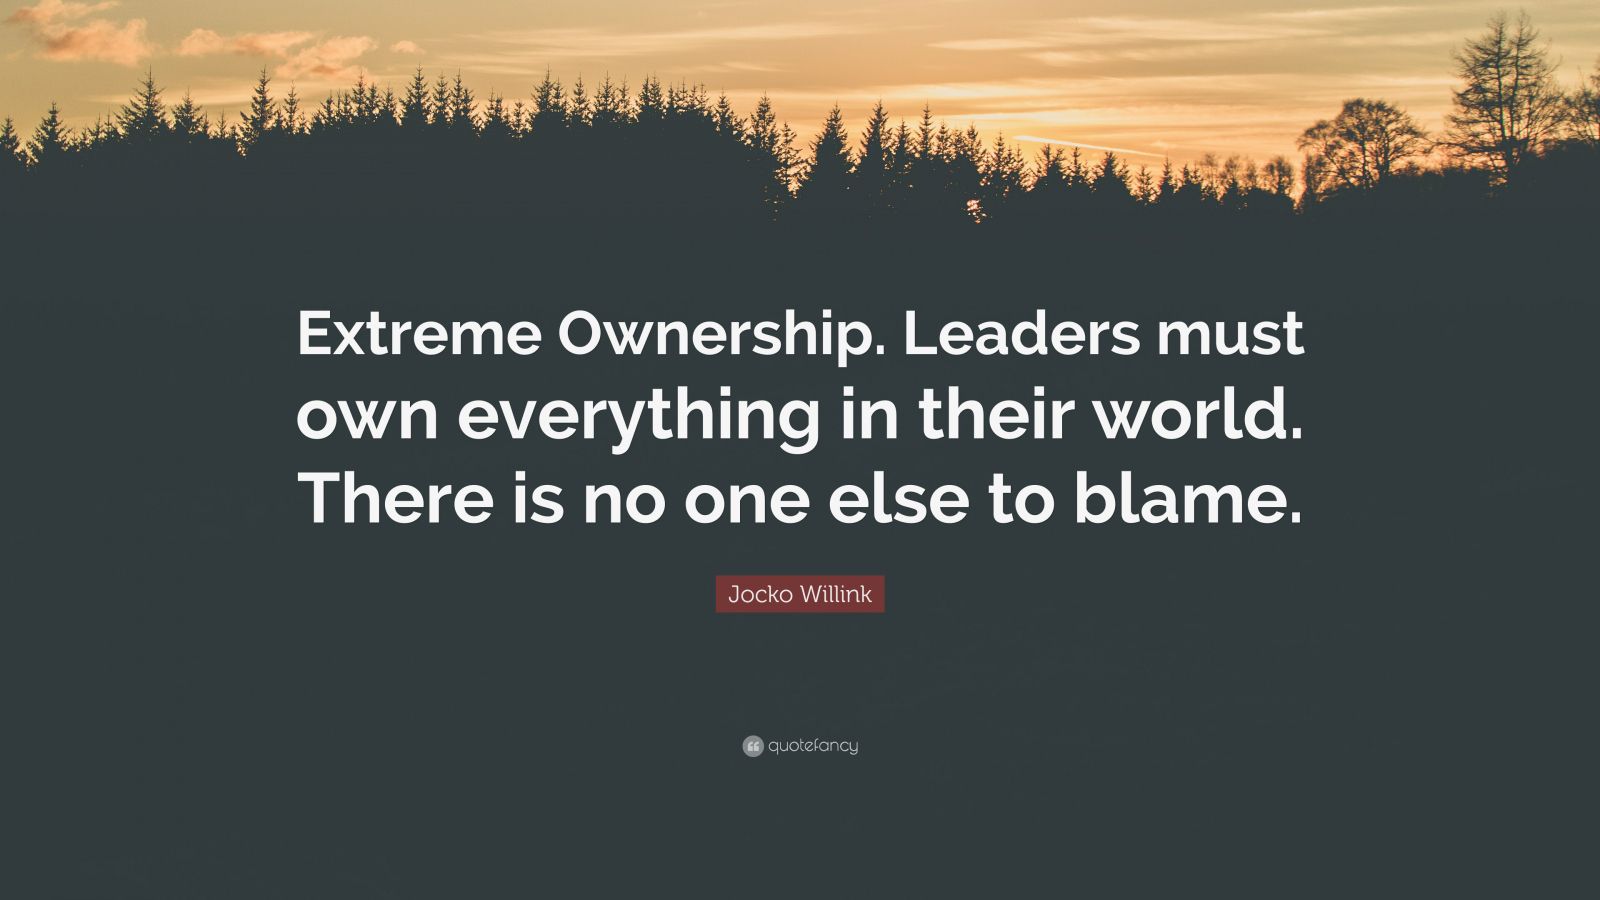 Jocko Willink Quote: “Extreme Ownership. Leaders must own everything in